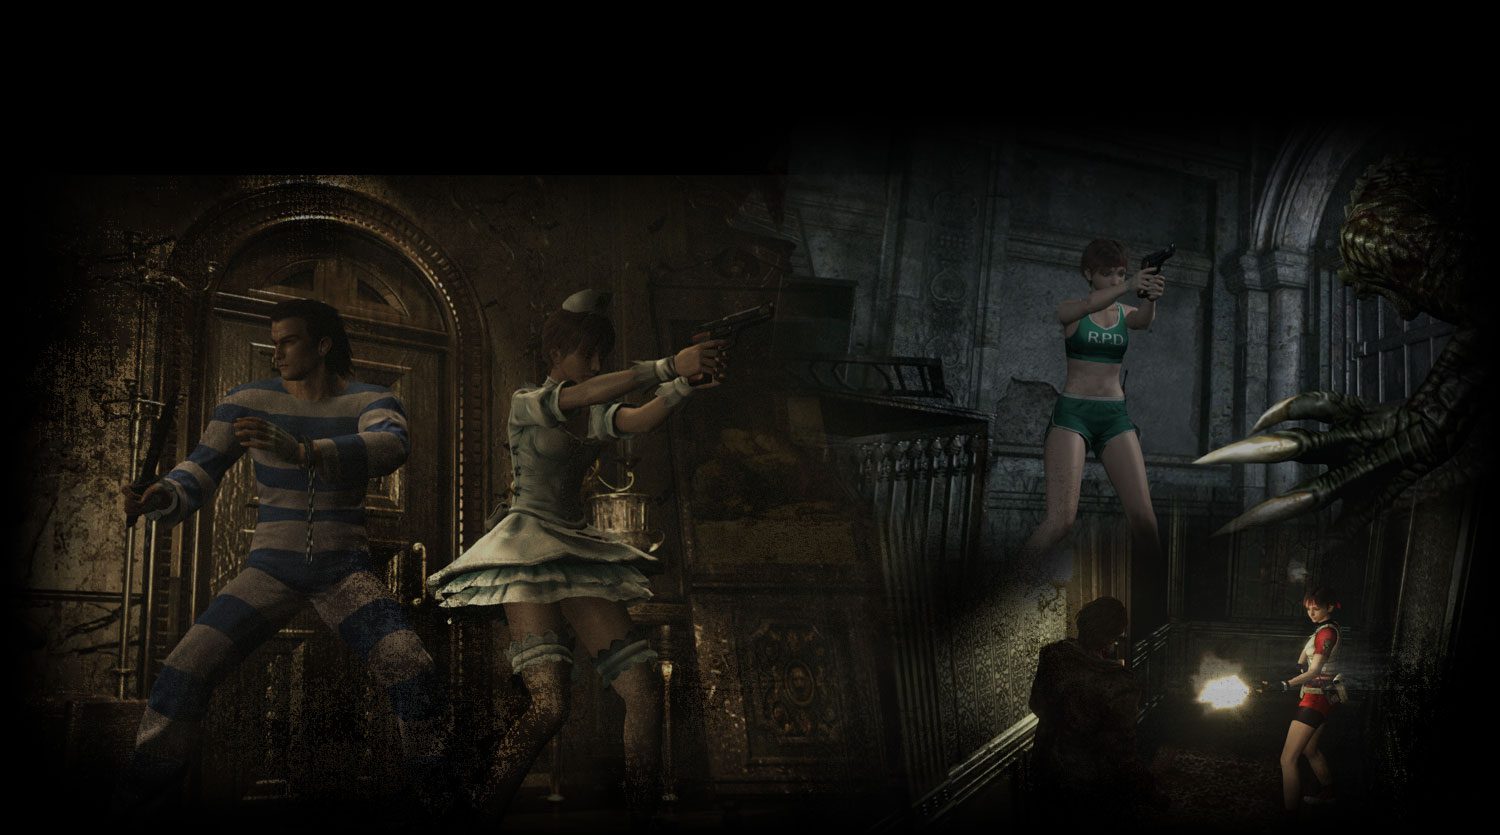 Three Resident Evil games are heading to the Nintendo Switch